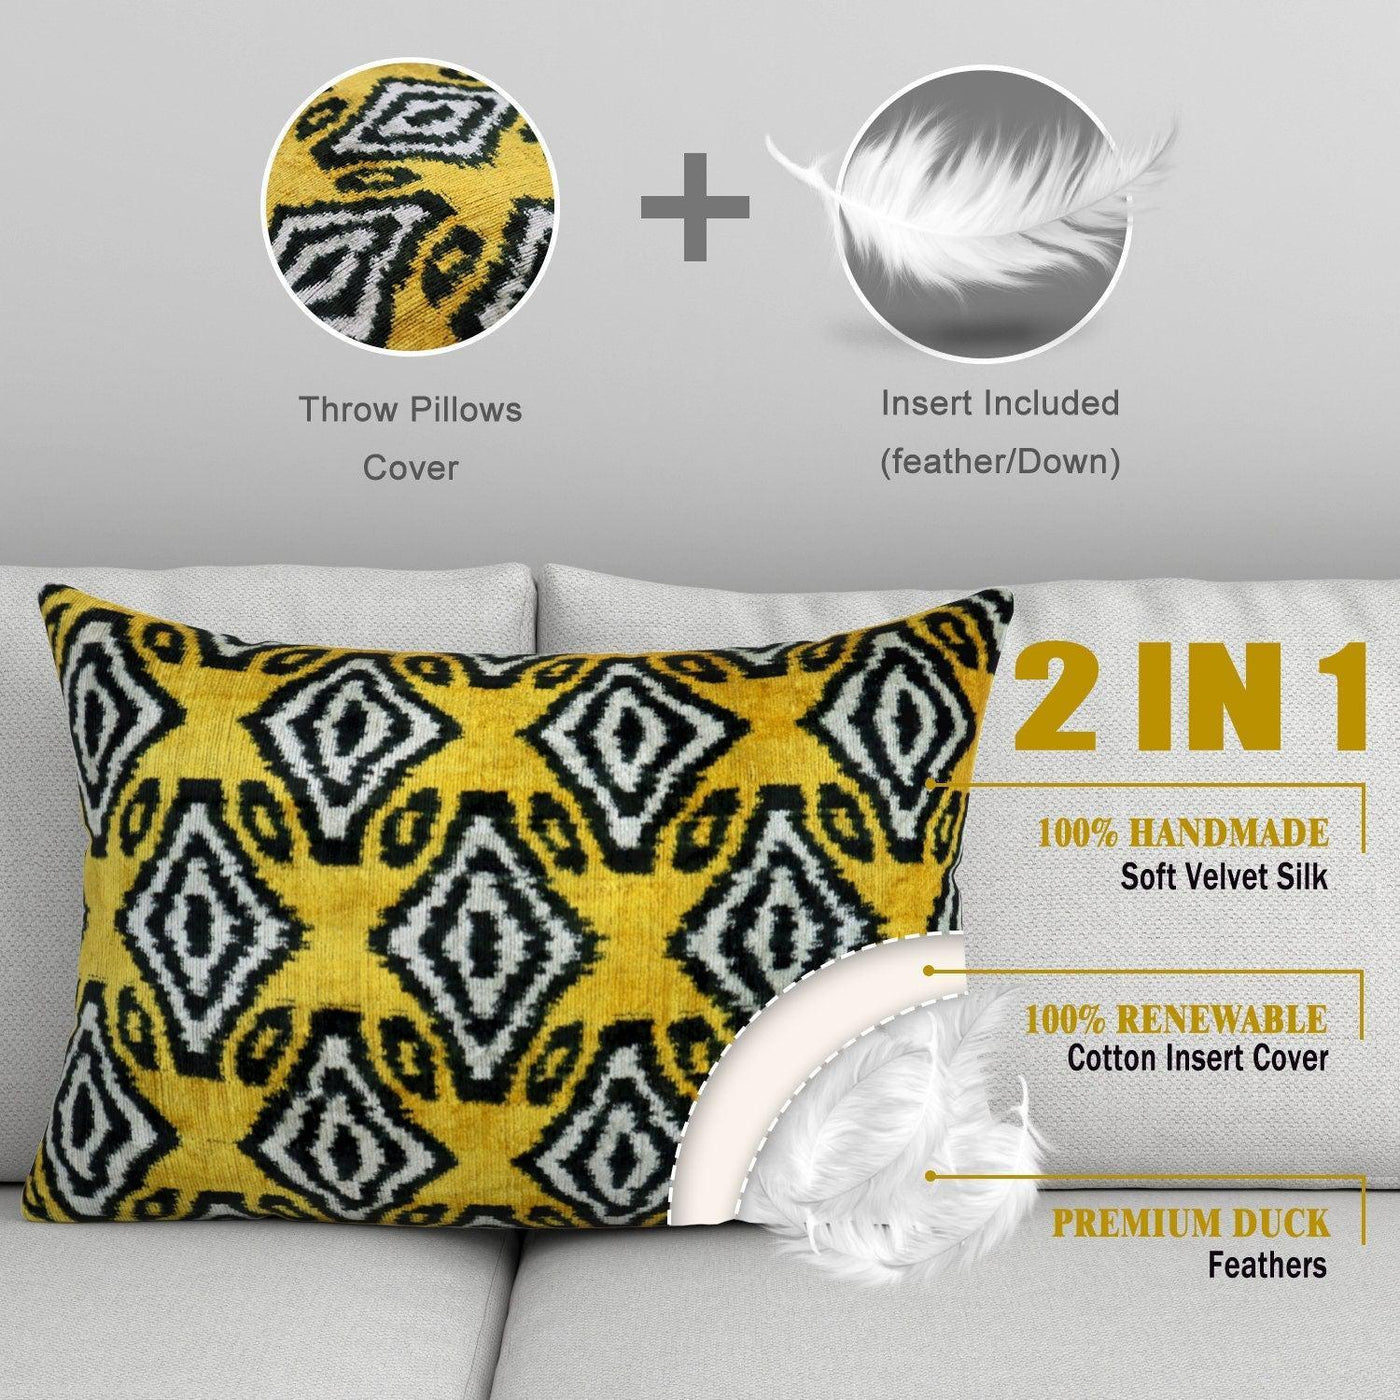 Canvello Black And Yellow Throw Pillows For Couch - 16x24 in